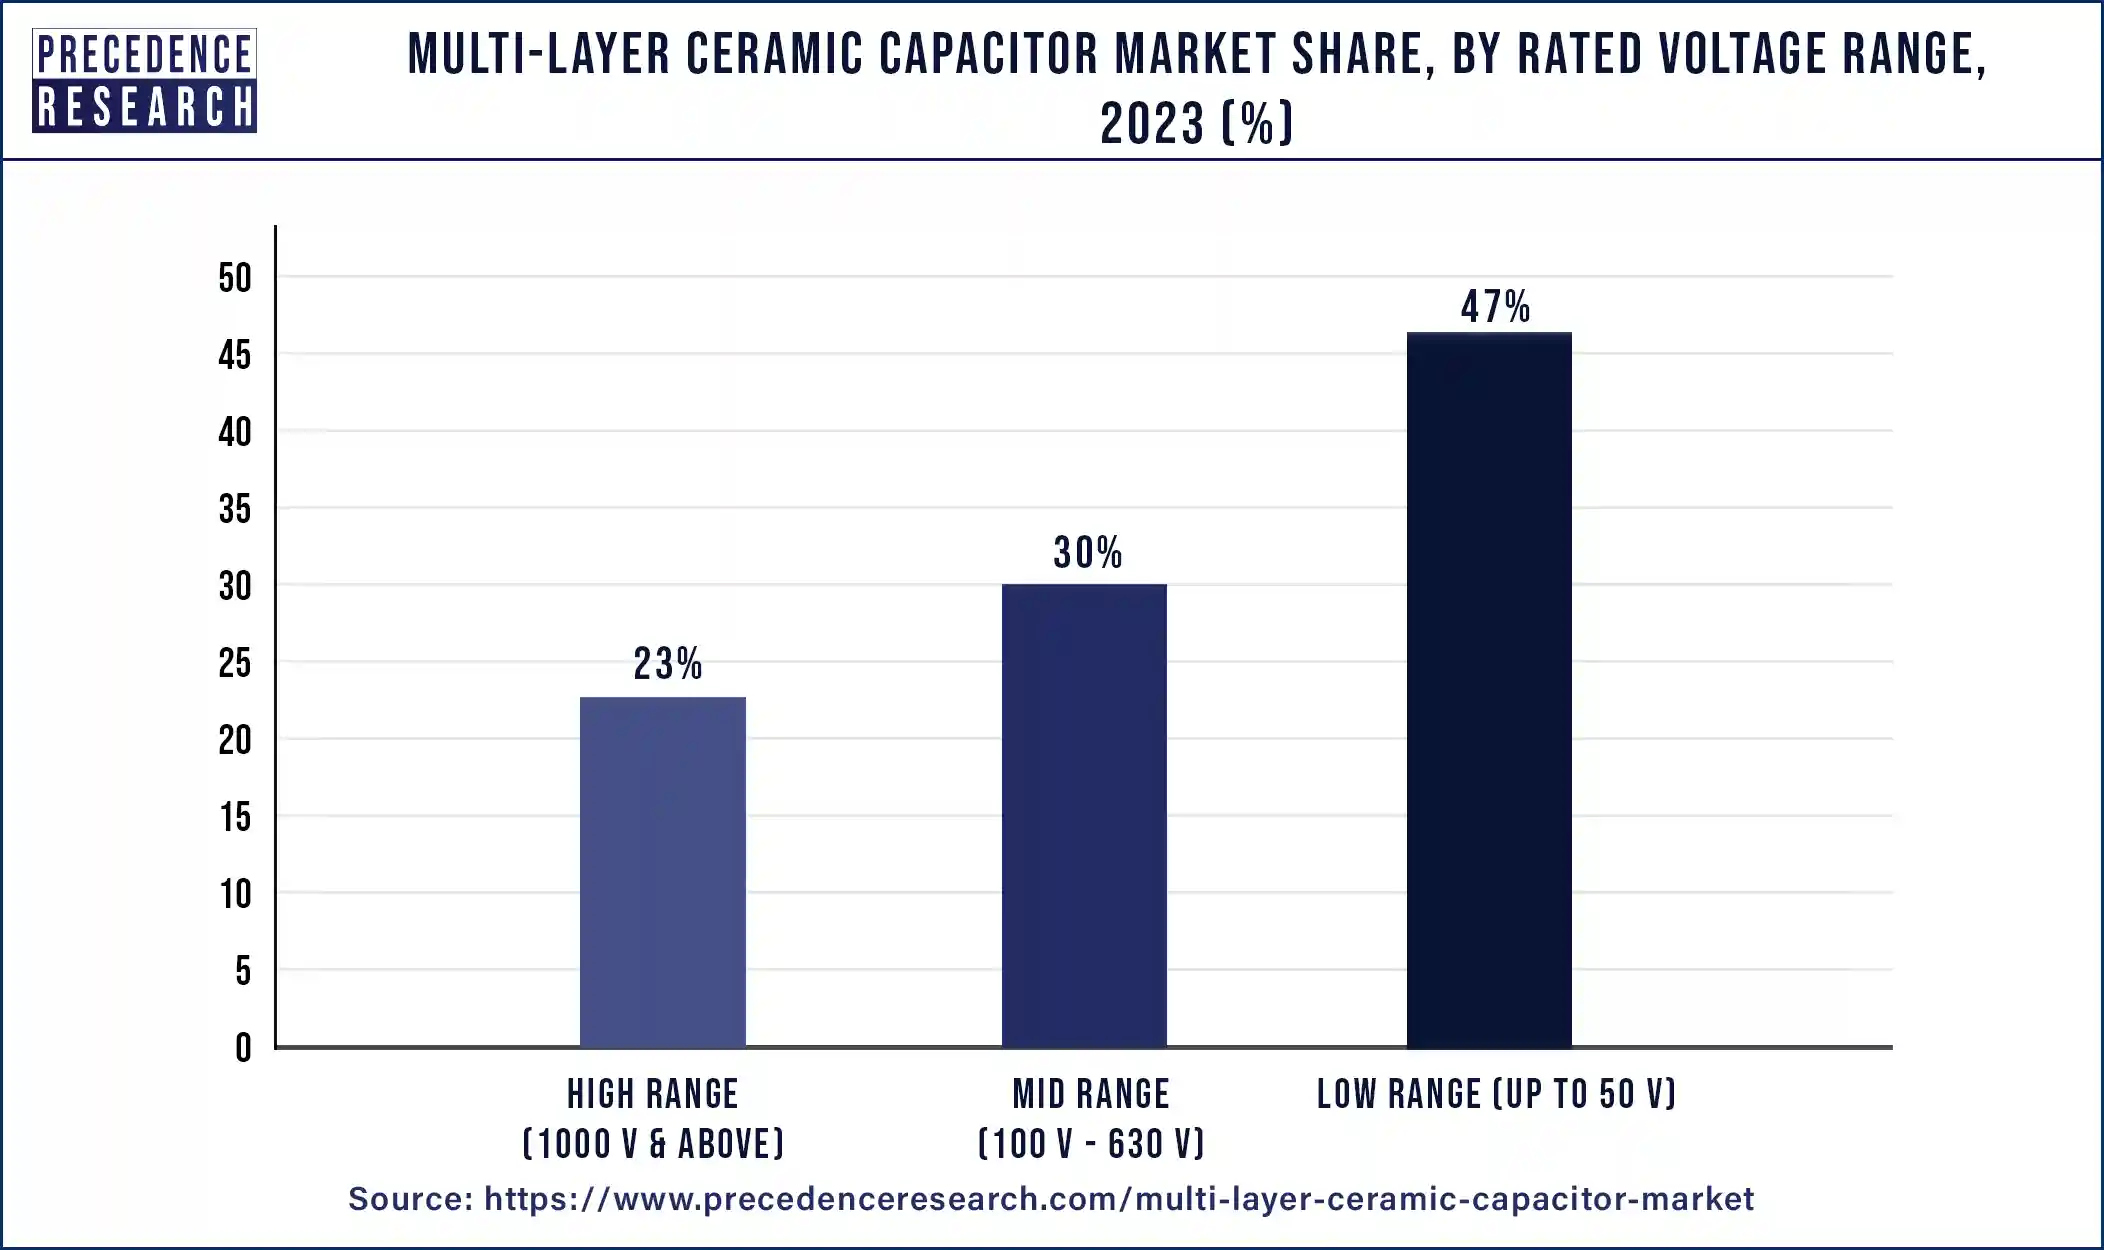 Multi-Layer Ceramic Capacitor Market Share, By Rated Voltage Range, 2023 (%)